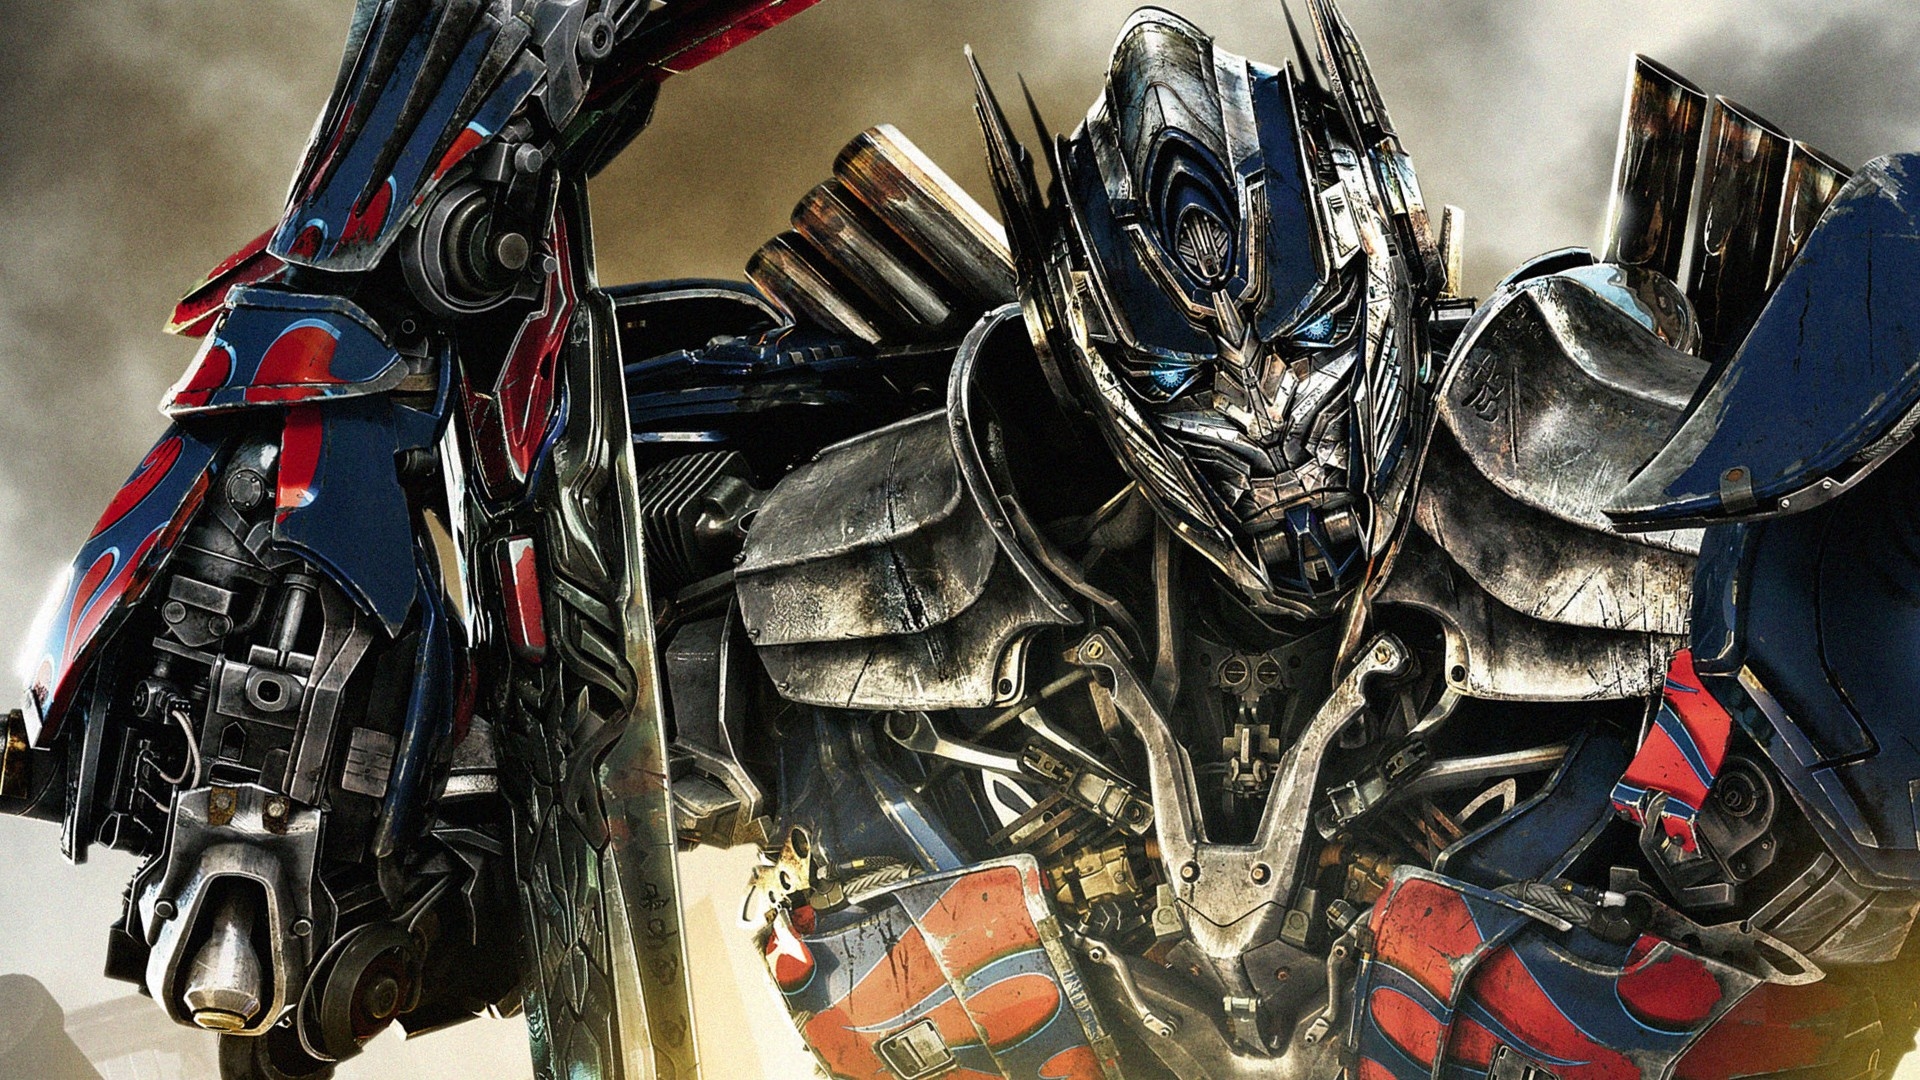 Transformers Age of Extinction Movie